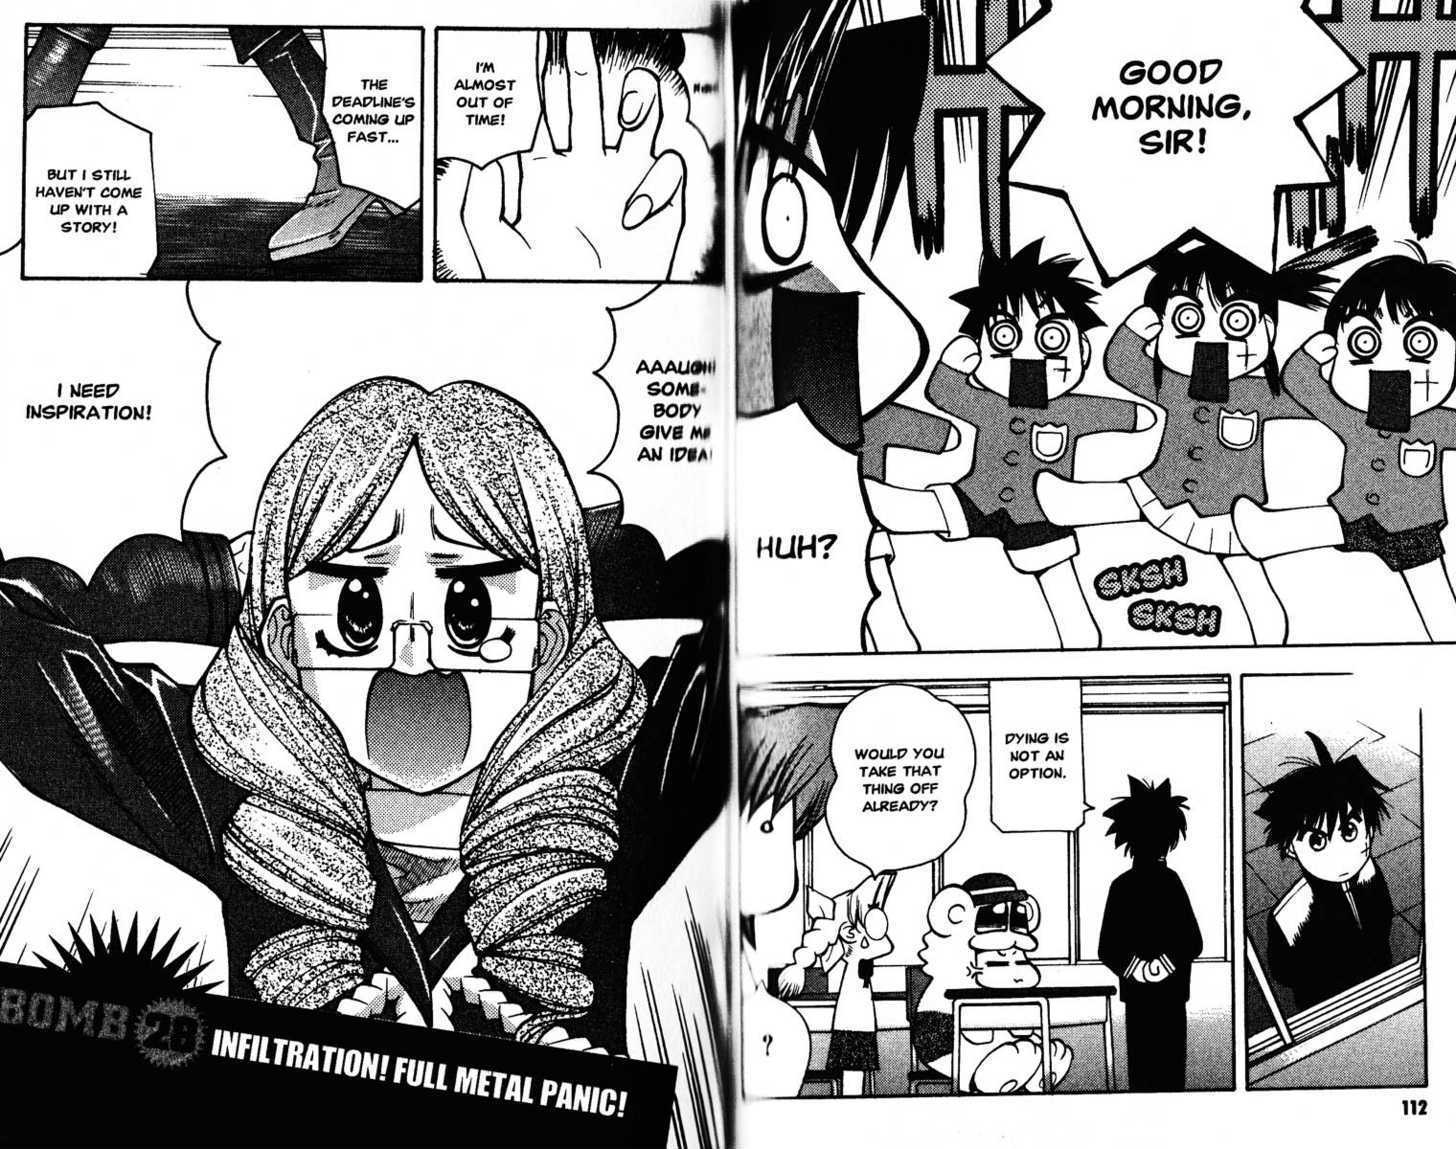 Full Metal Panic! Overload Vol.5 Chapter 28 : Infiltration! Ful Metal Panic! - Picture 1